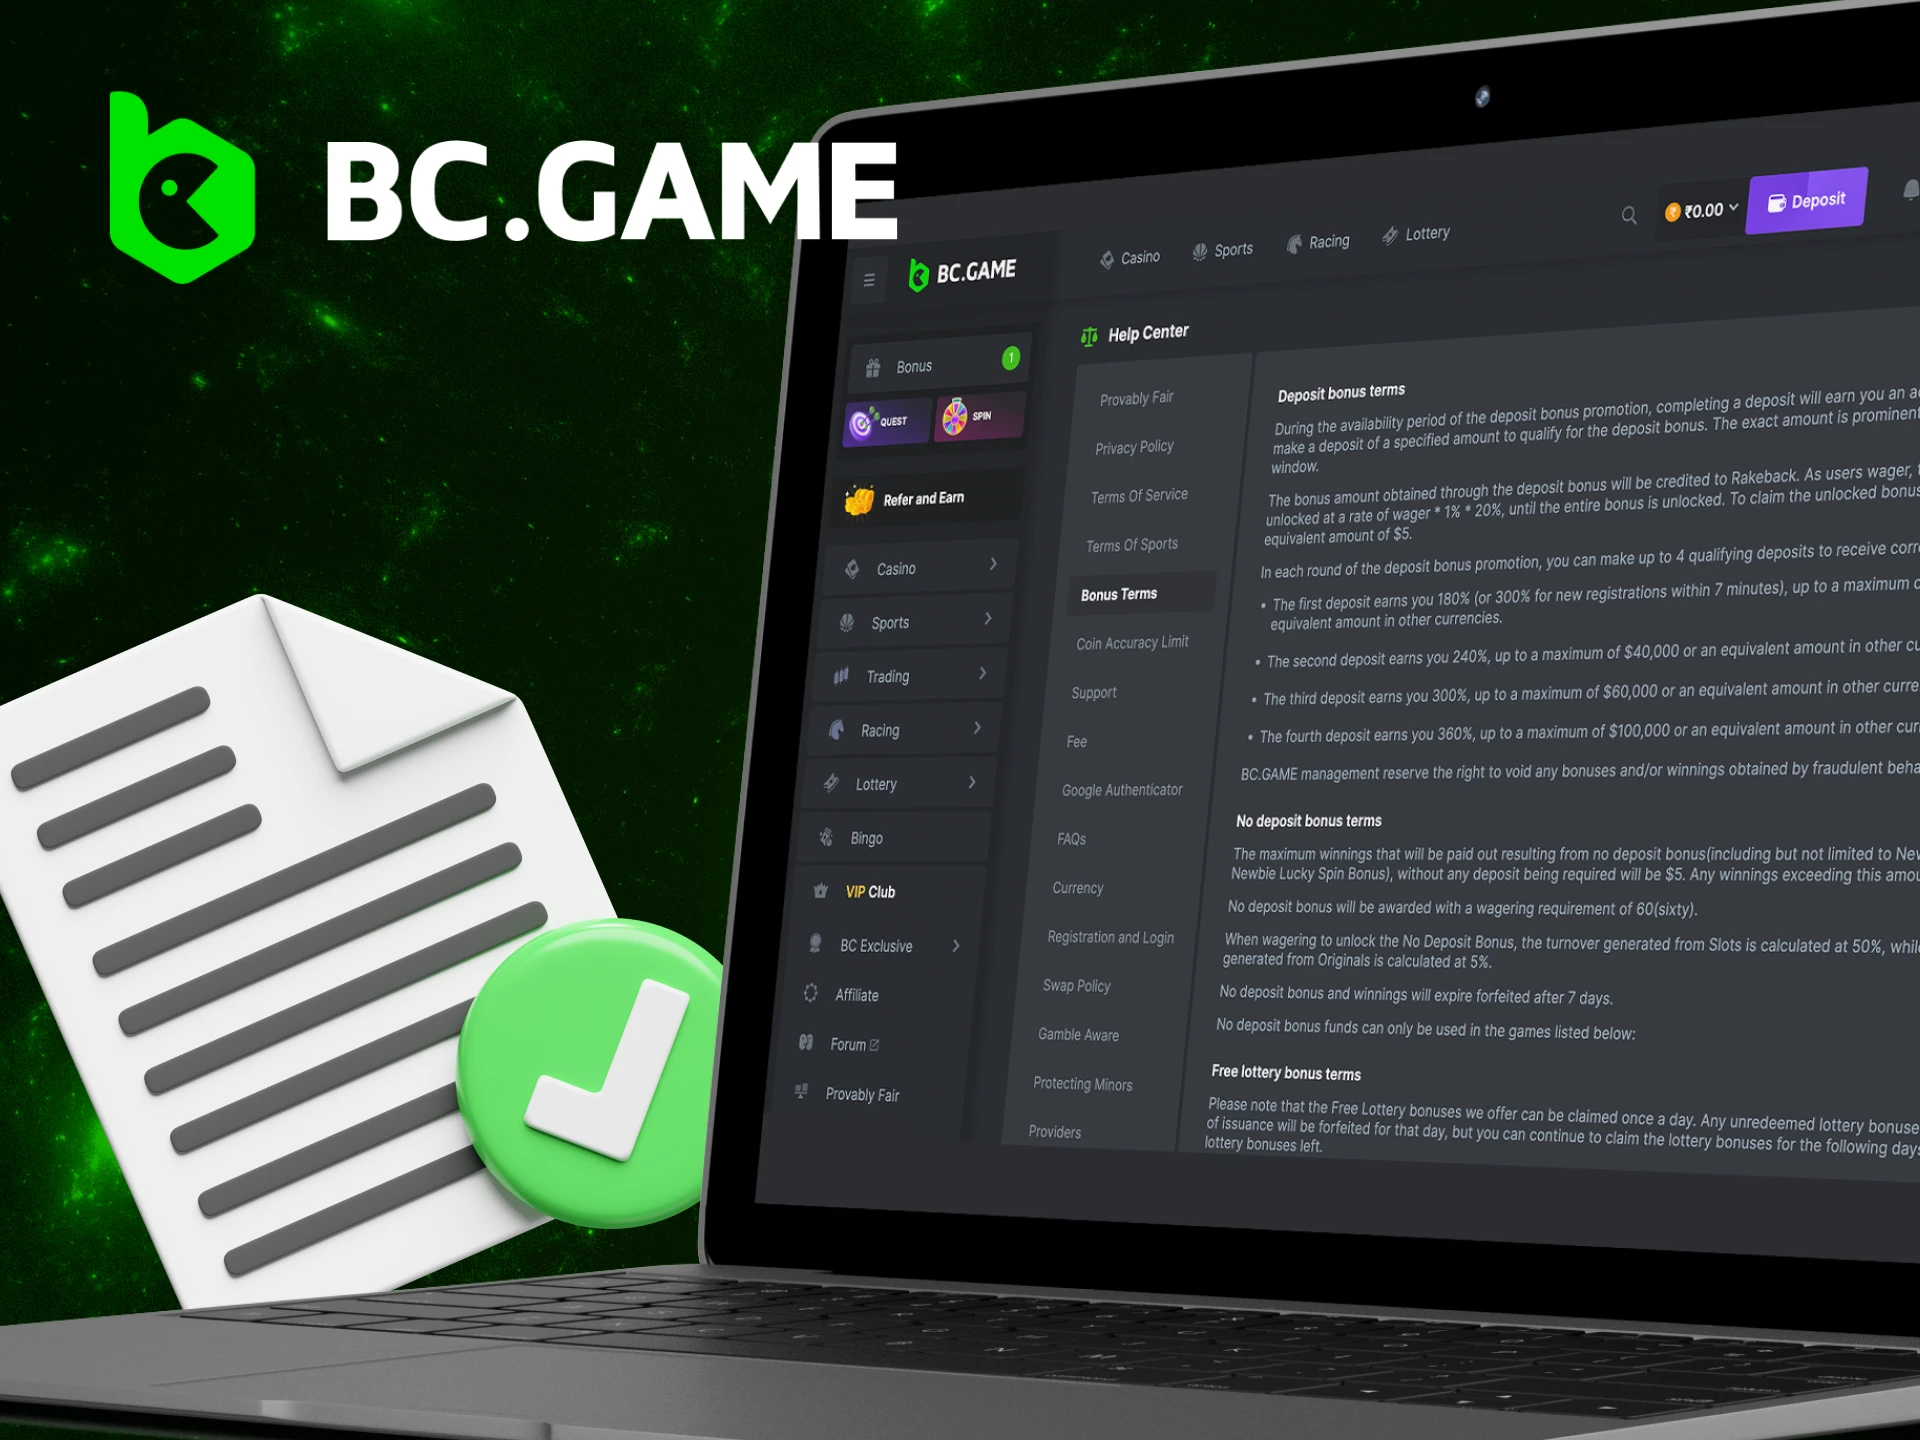 What are the terms and conditions for receiving bonuses on the BC Game website.